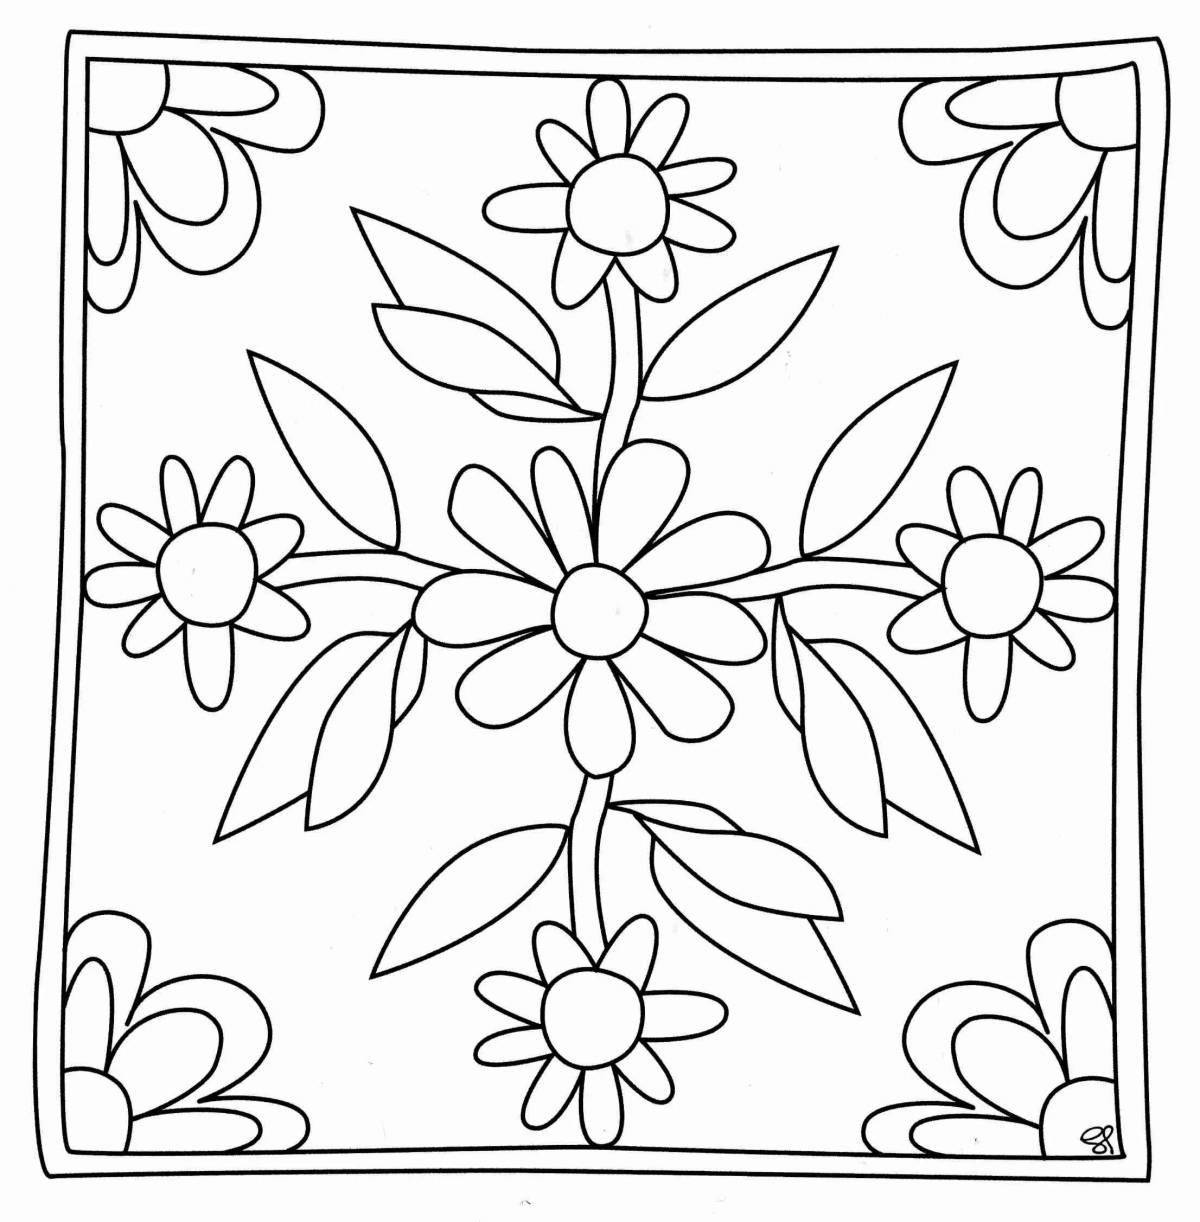 Fun coloring of the pavlovian scarf for kids